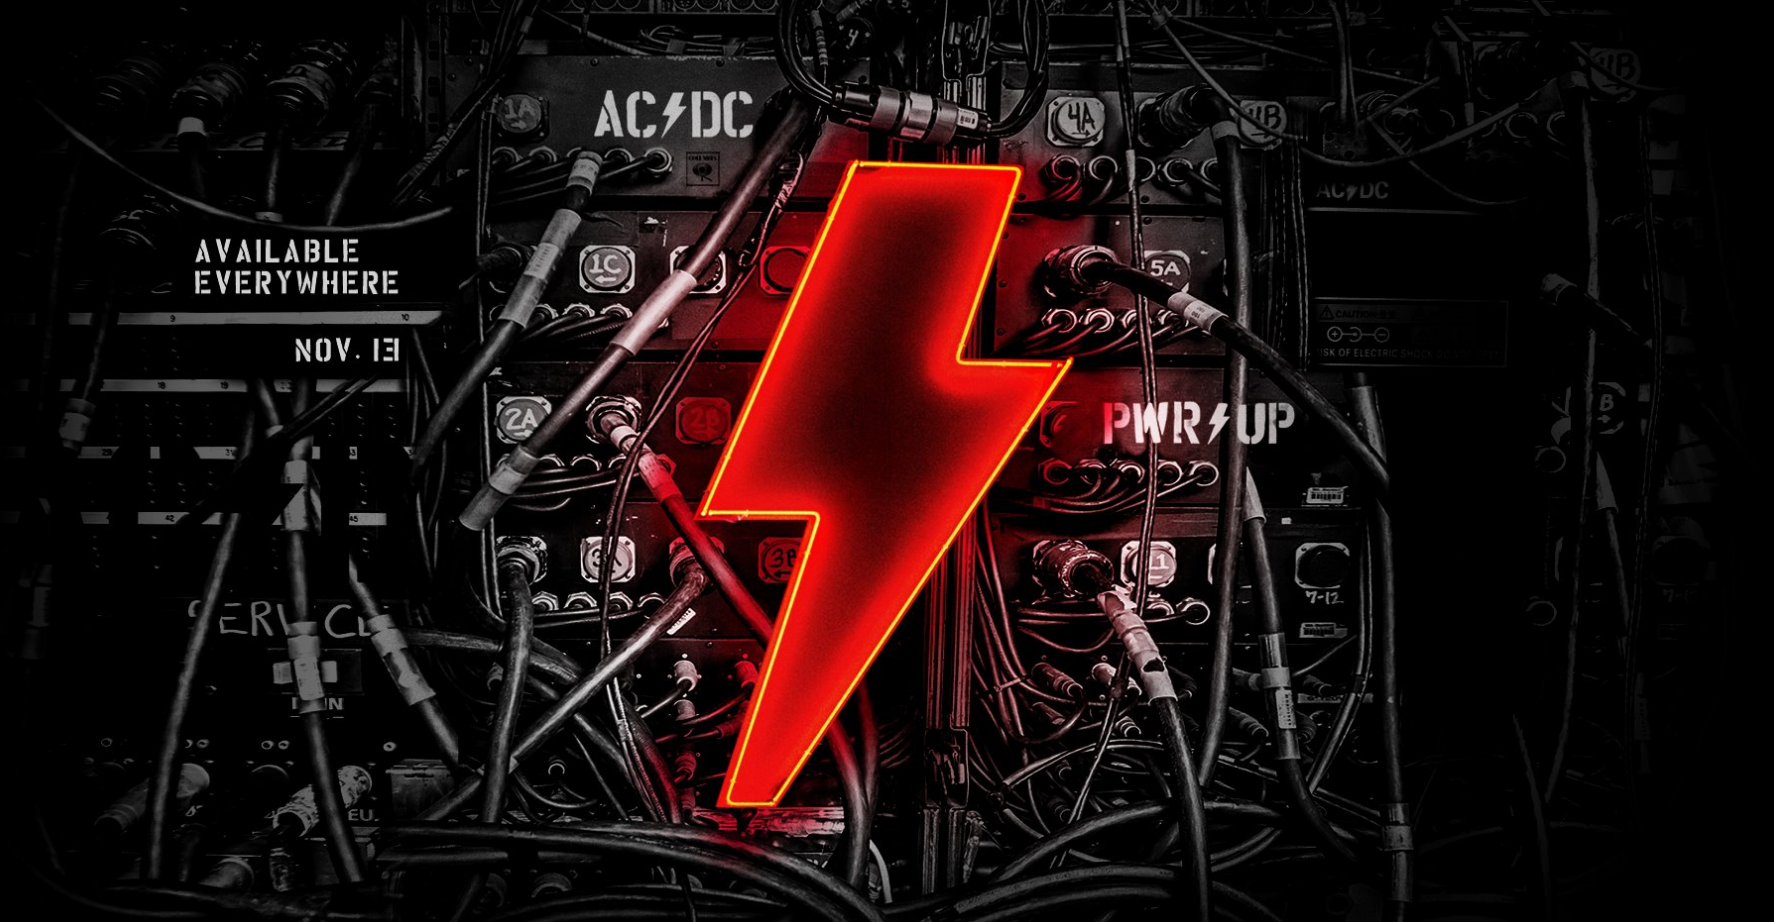 AC/DC Announce New Album ‘POWER UP’ Featuring Classic Lineup, Share Single “Shot in the Dark”